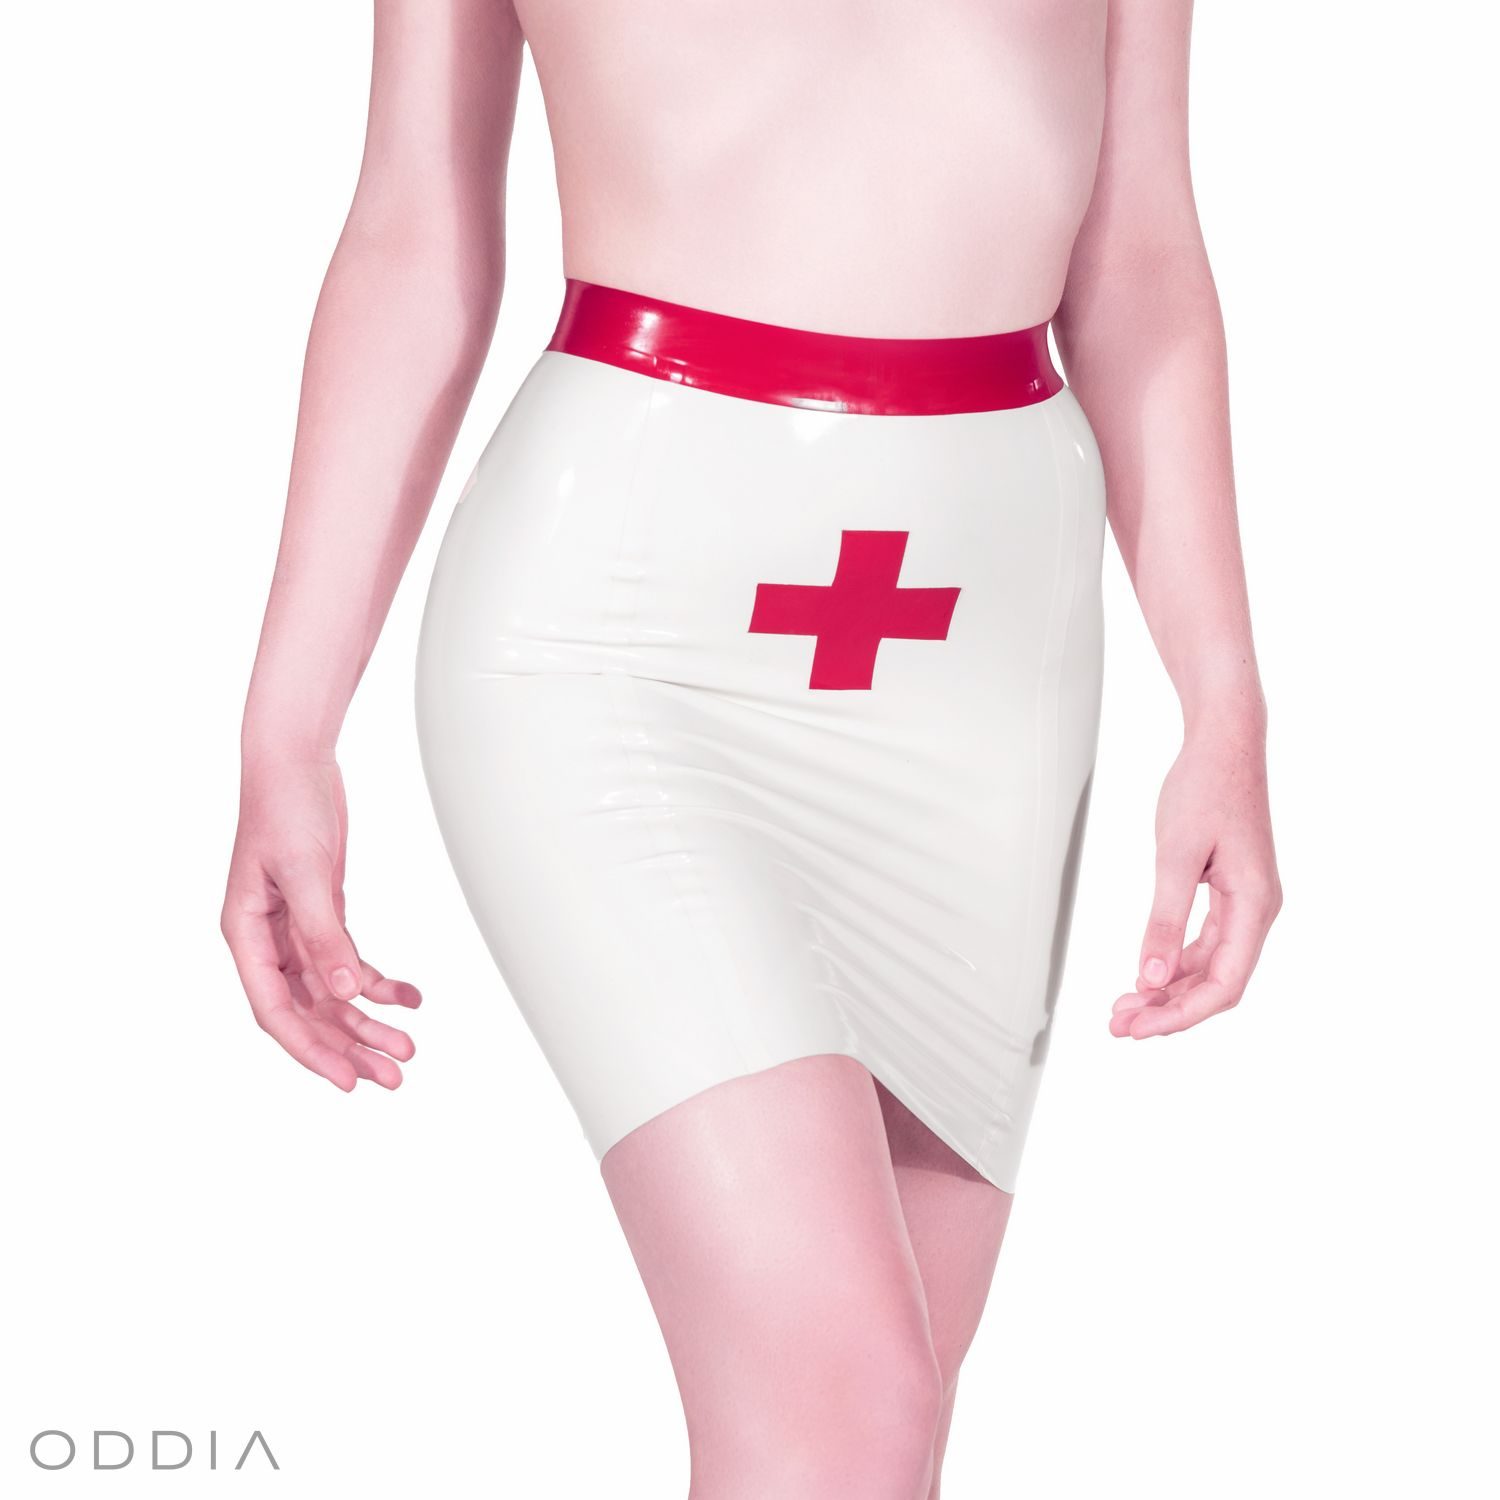 A white tight-fitting latex skirt with red contrasting elements.